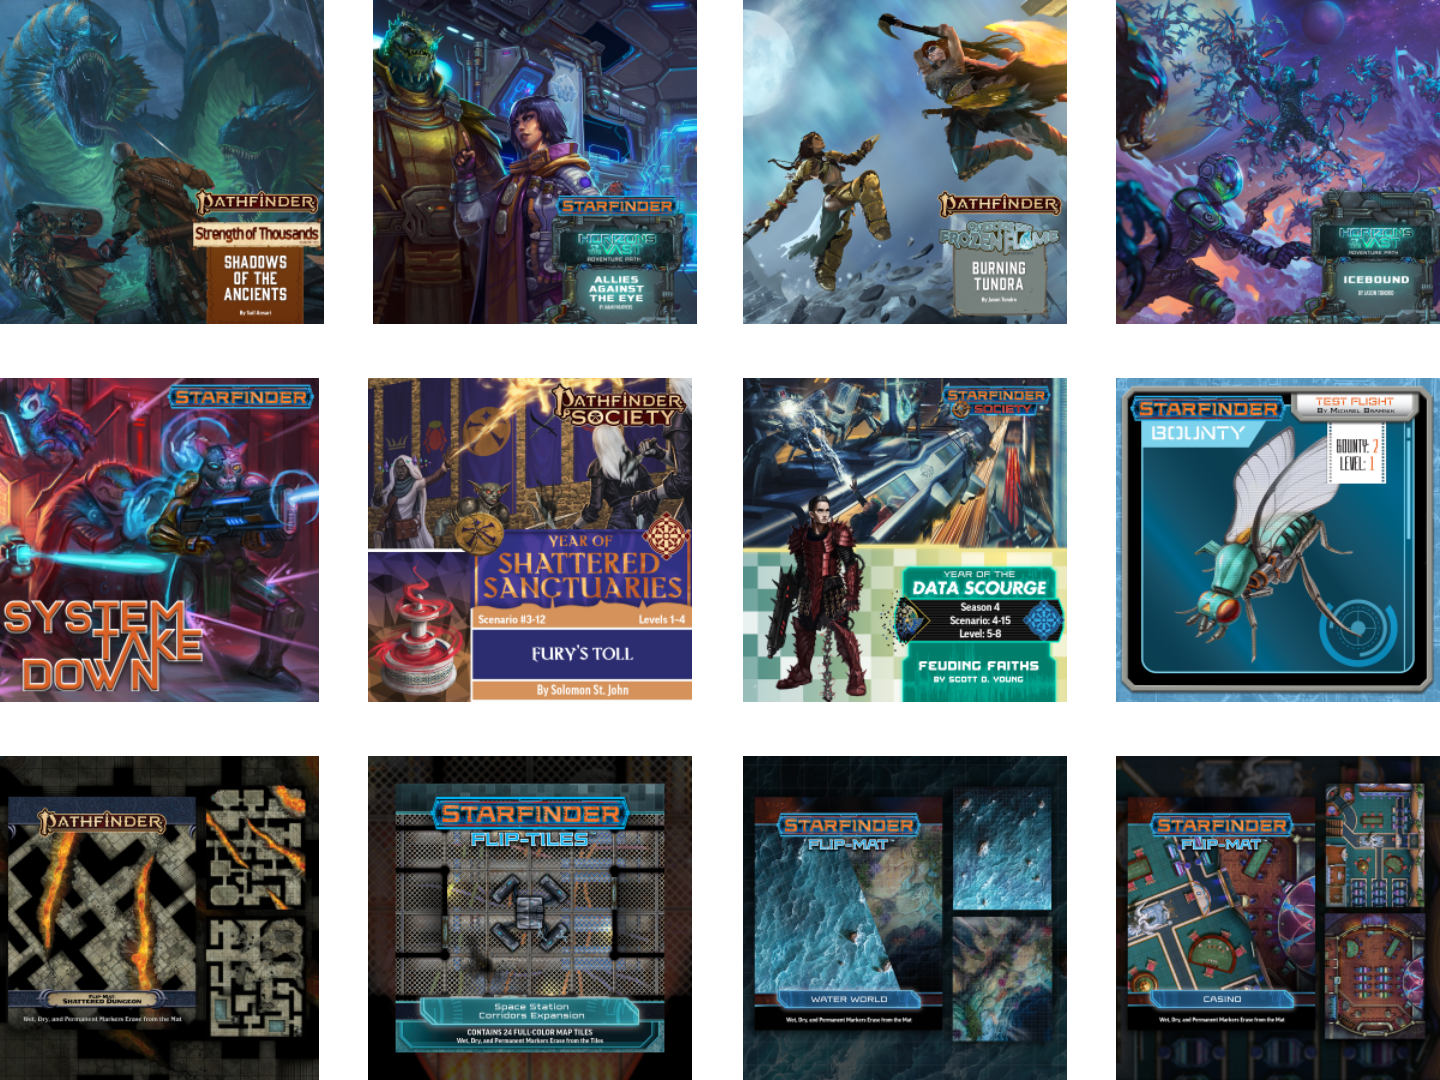 Paizo March 2022 new releases spread of promotional art